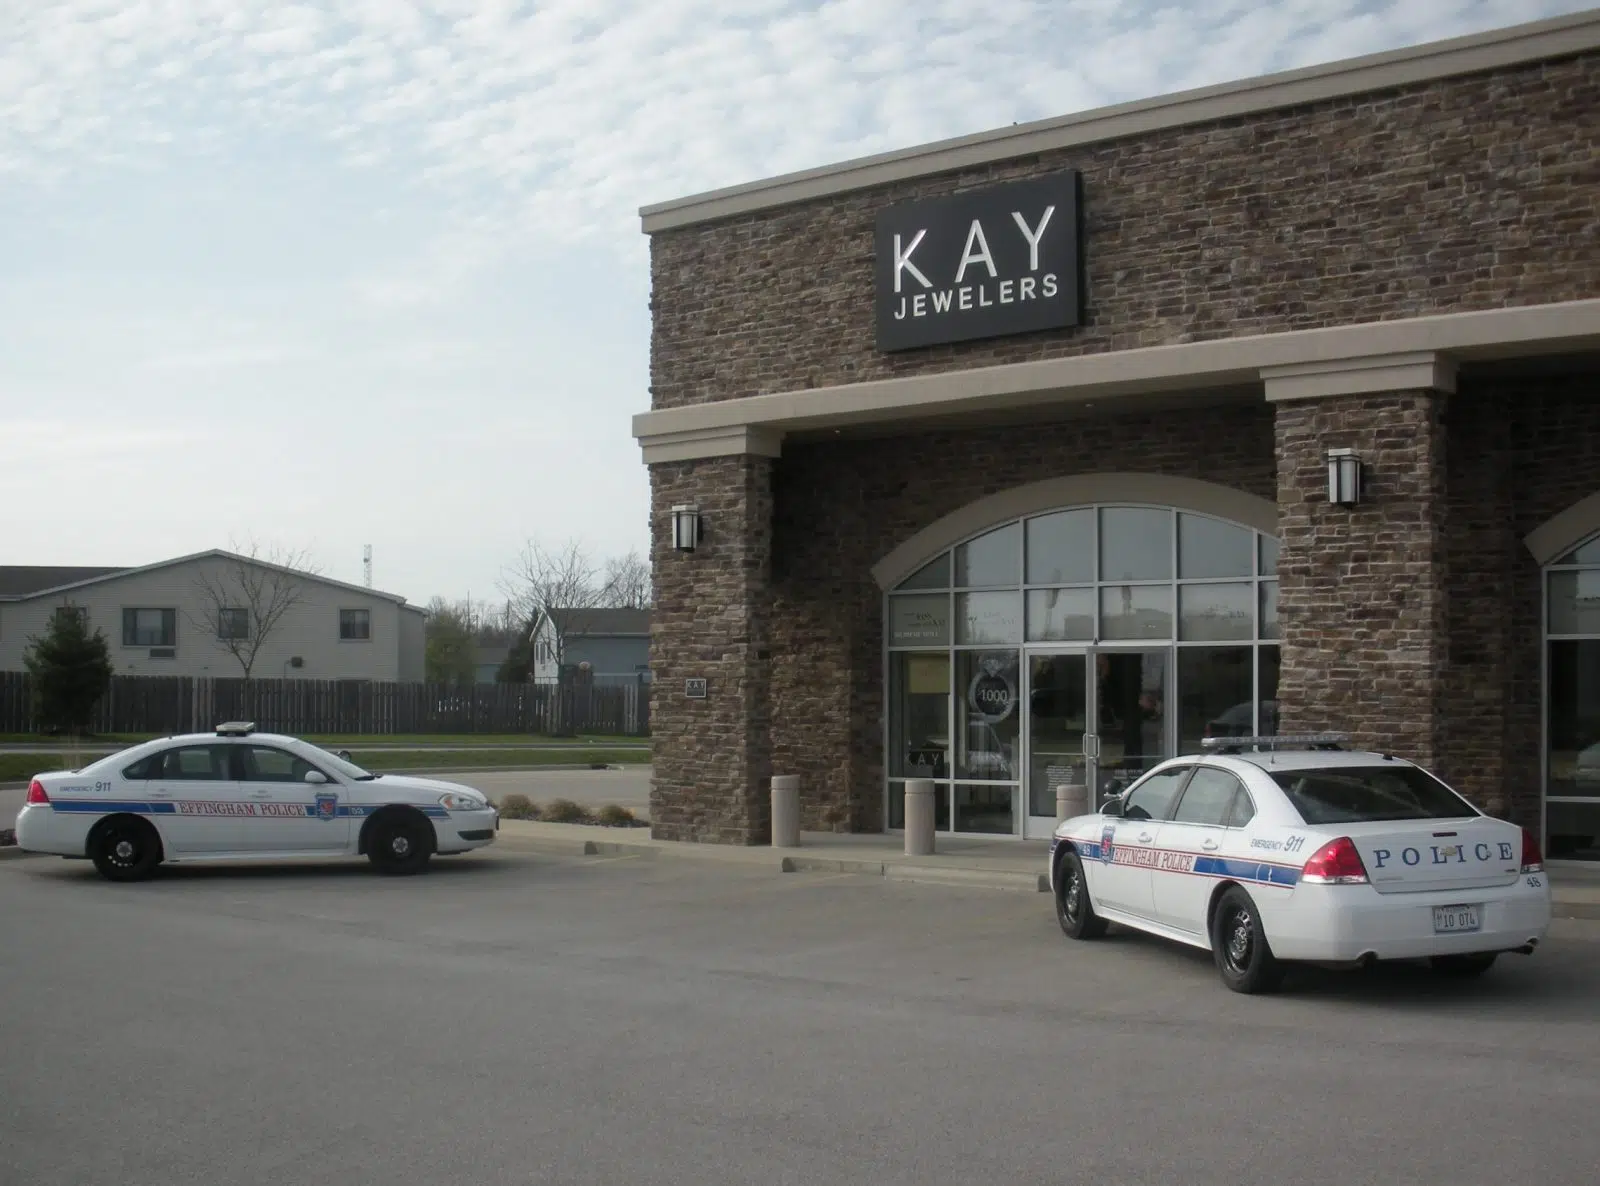 Police at Kay Jewelers investigating an alleged robbery Sunday evening. 